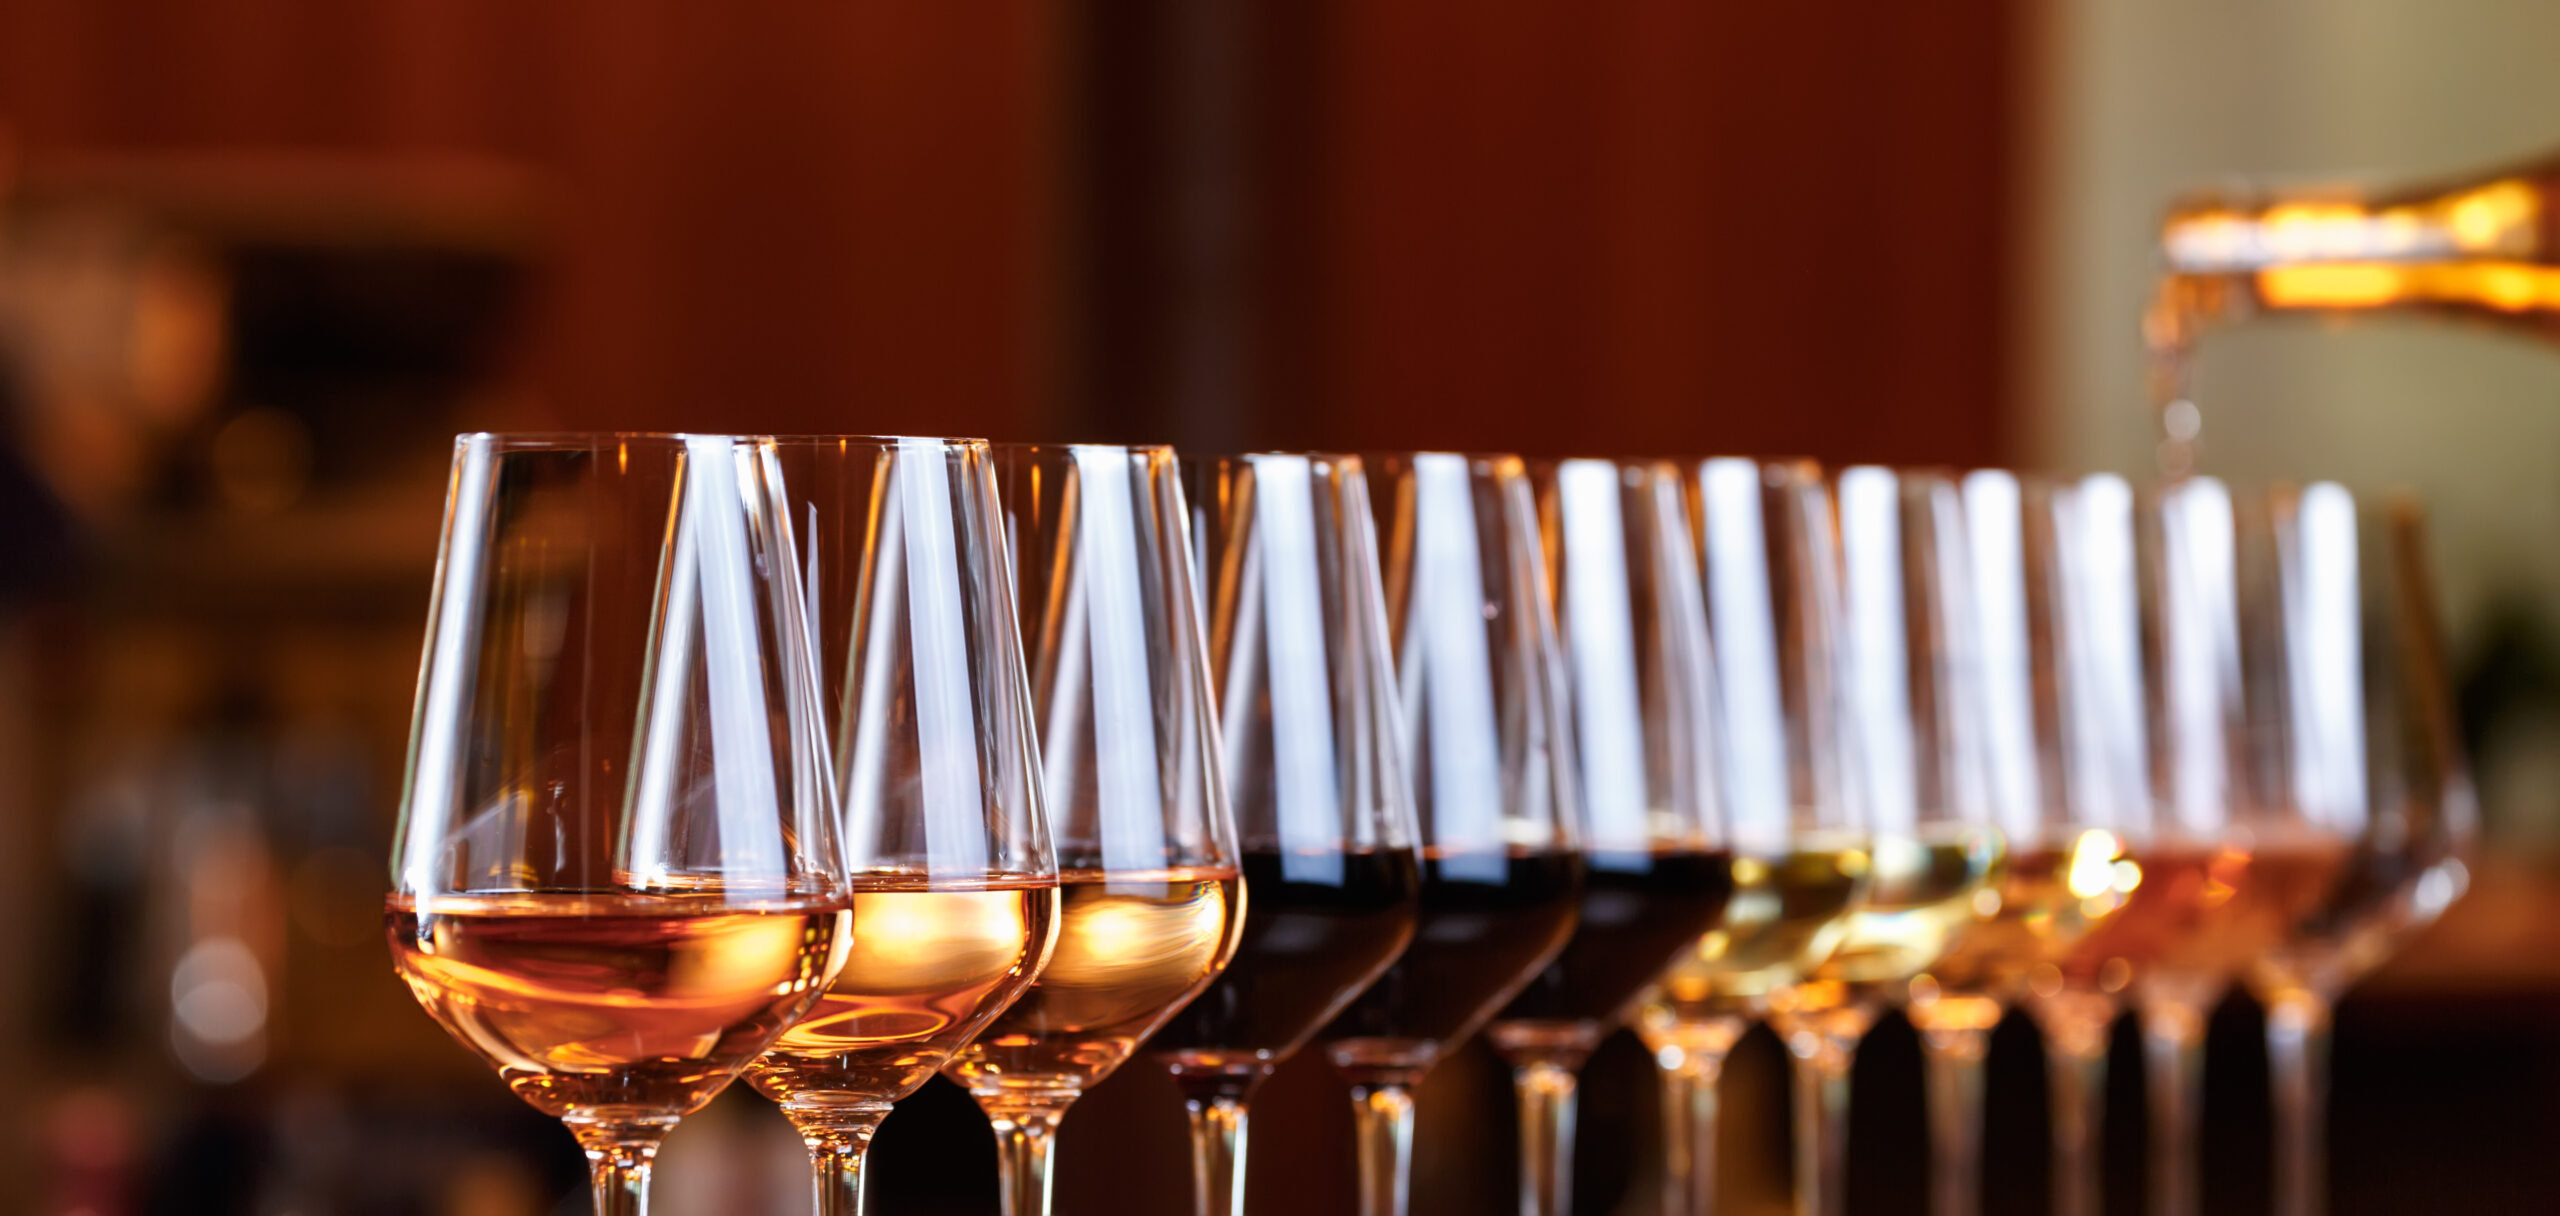 Wine glasses in a row. Pouring wine. Buffet table celebration of wine tasting. Nightlife, celebration and entertainment concept. Horizontal, wide screen banner format